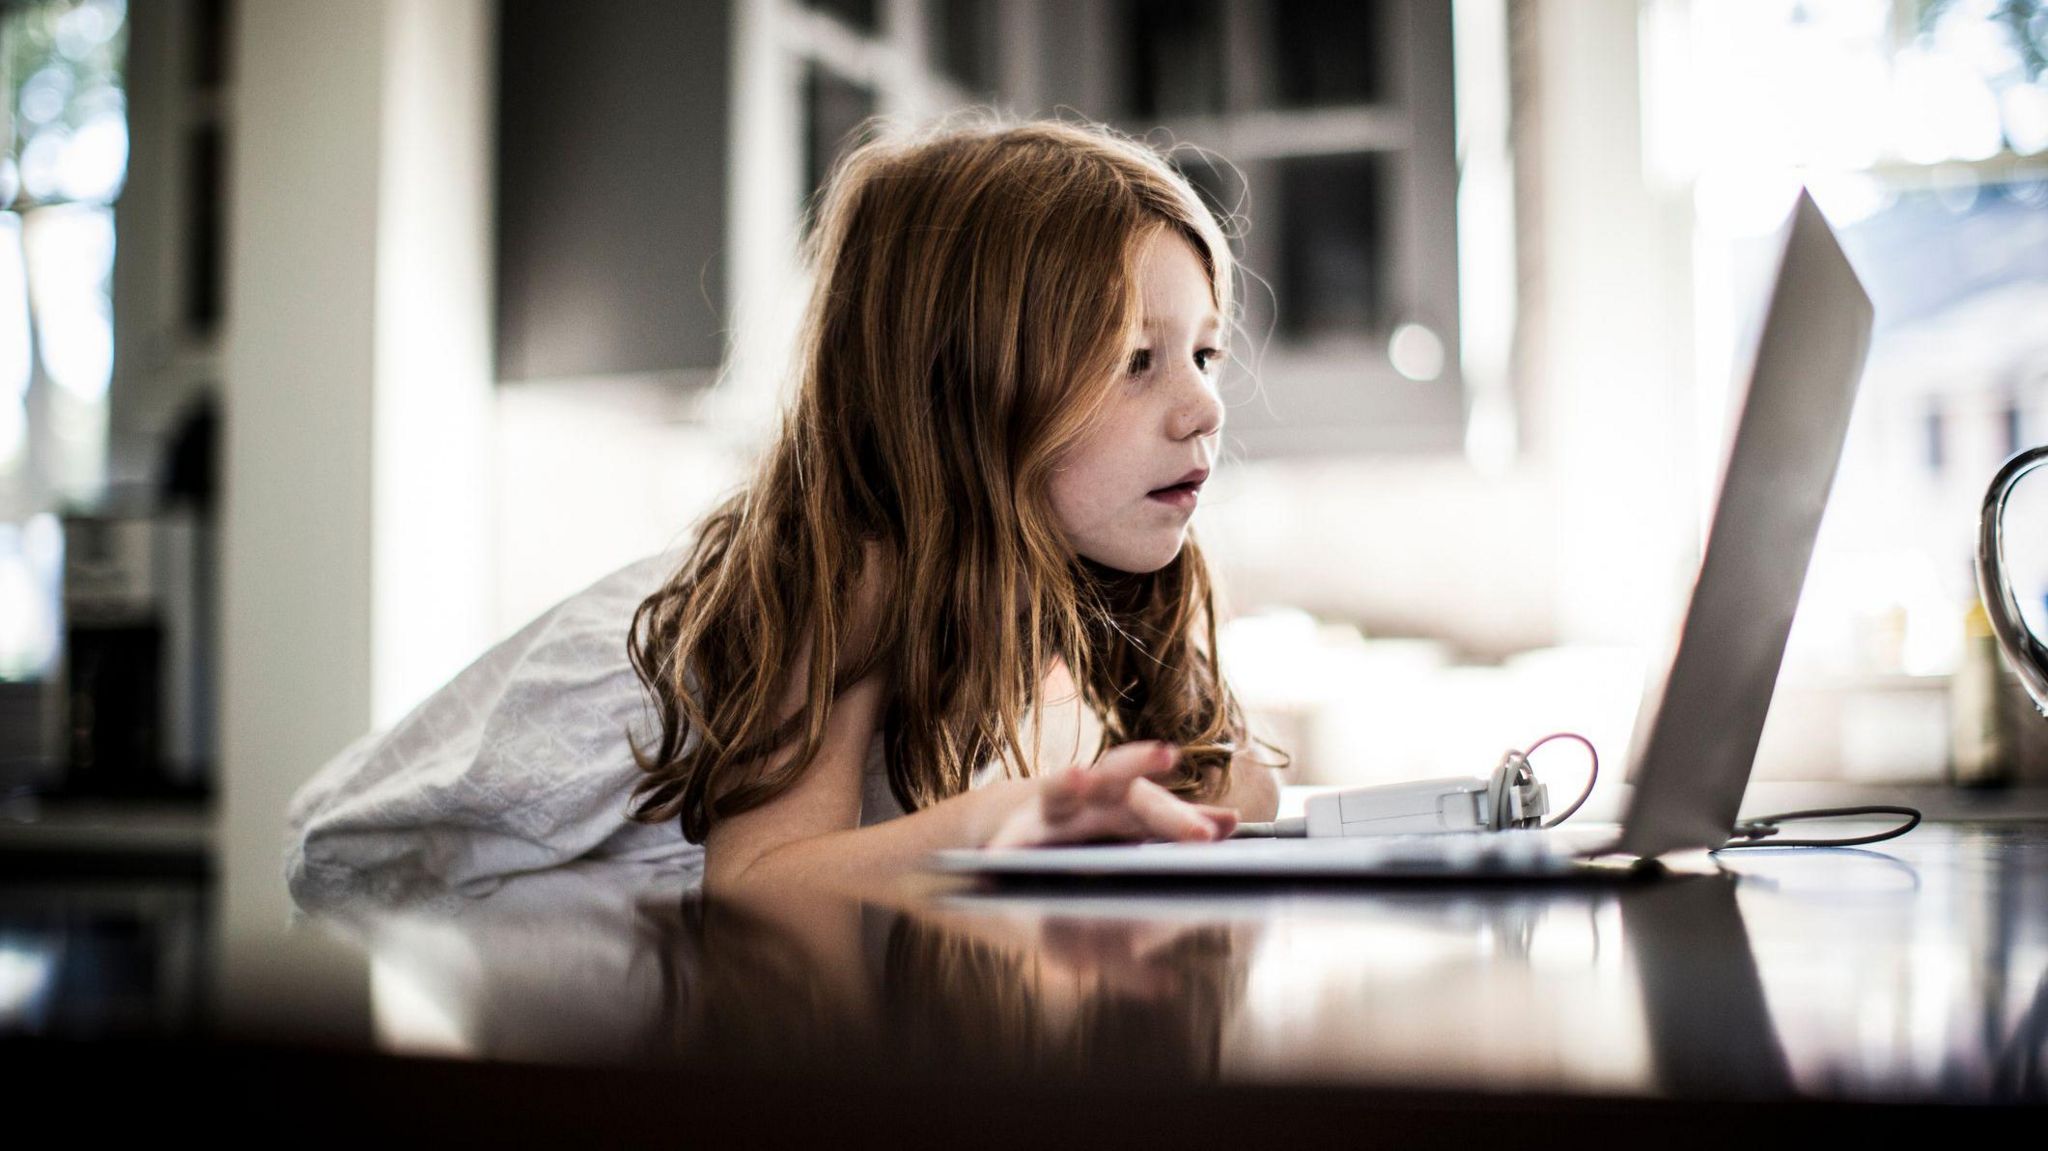 Young girl sits looking at a laptop screen